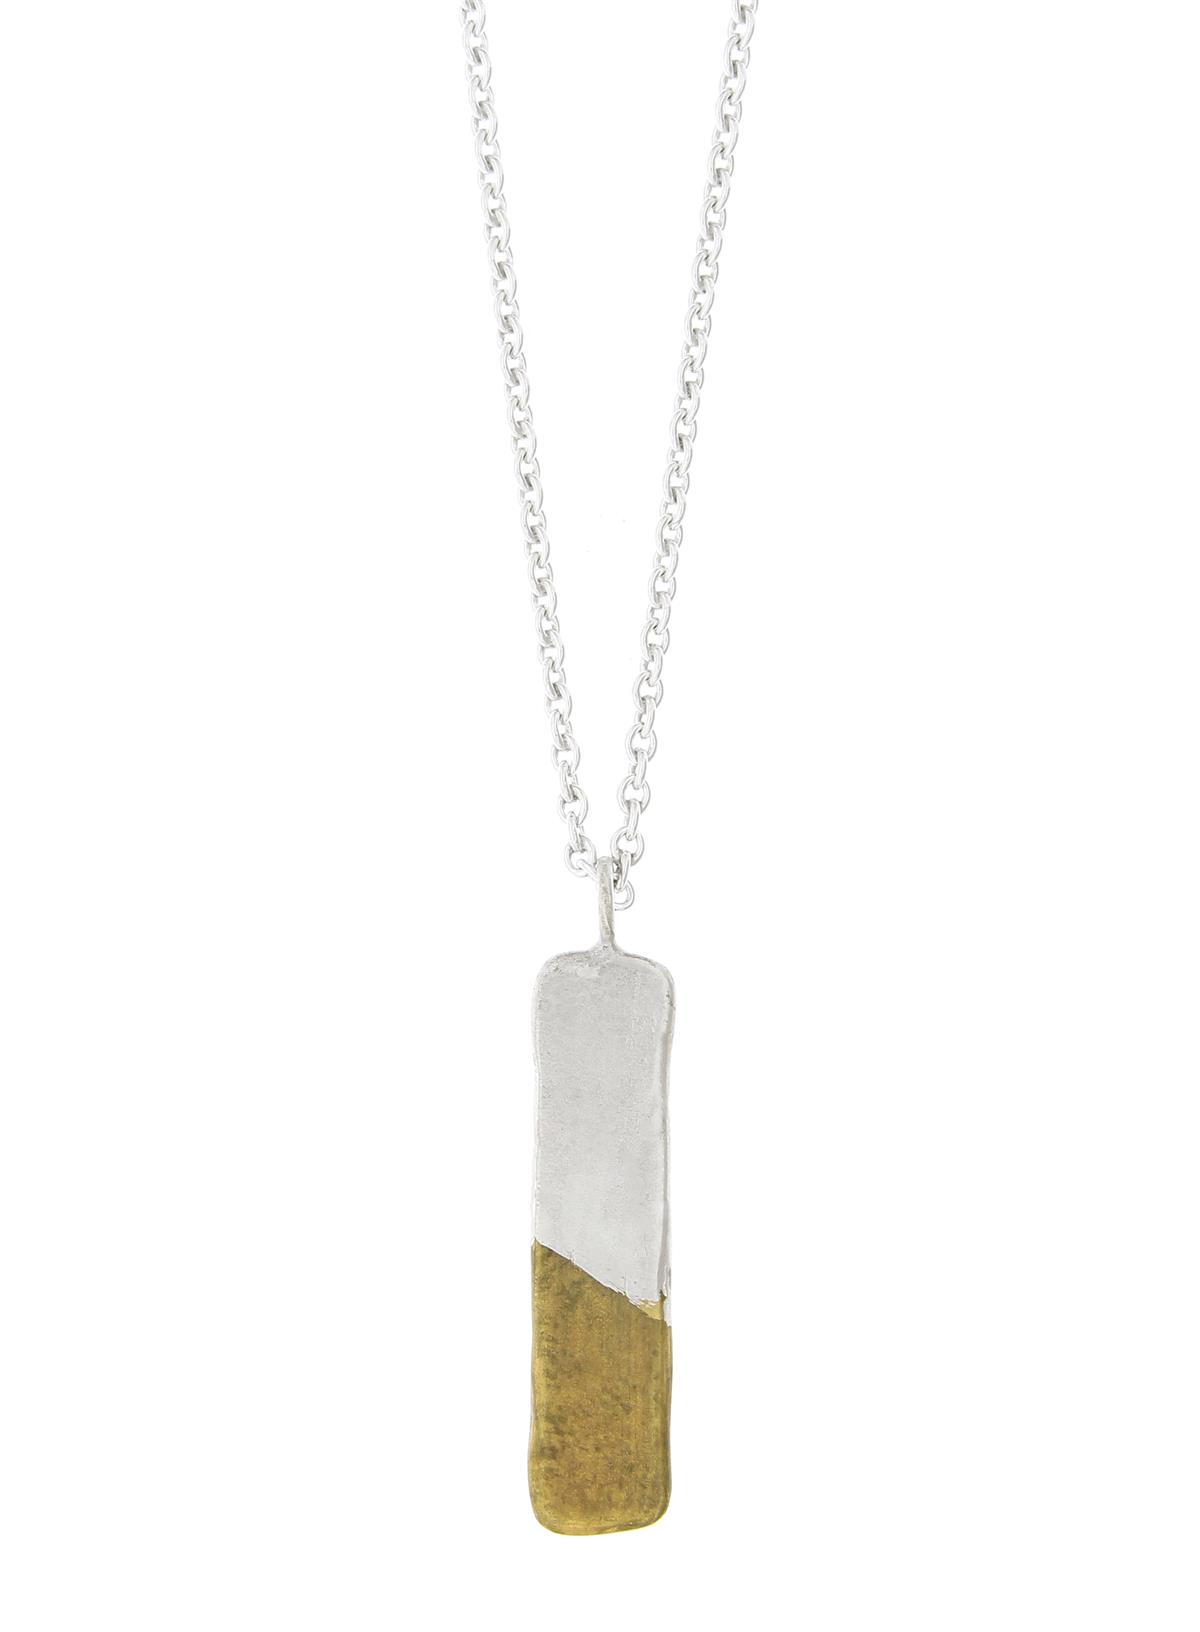 Katie g. Jewellery_Tag Pendant - Long wide - silver with Teilvergoldung 